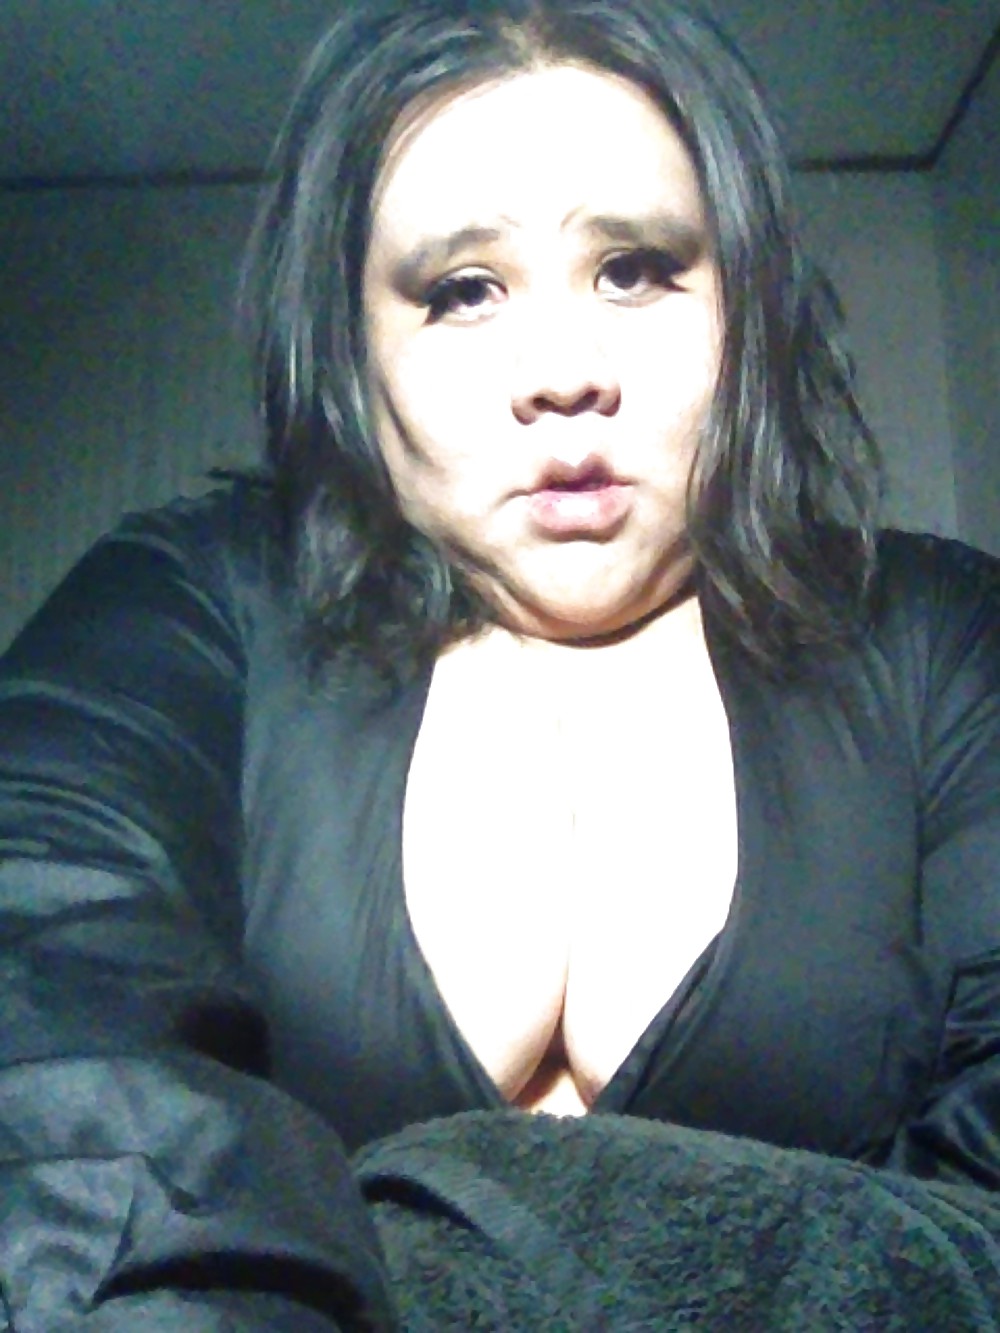 Latino bbw cleavage queen
 #20559013